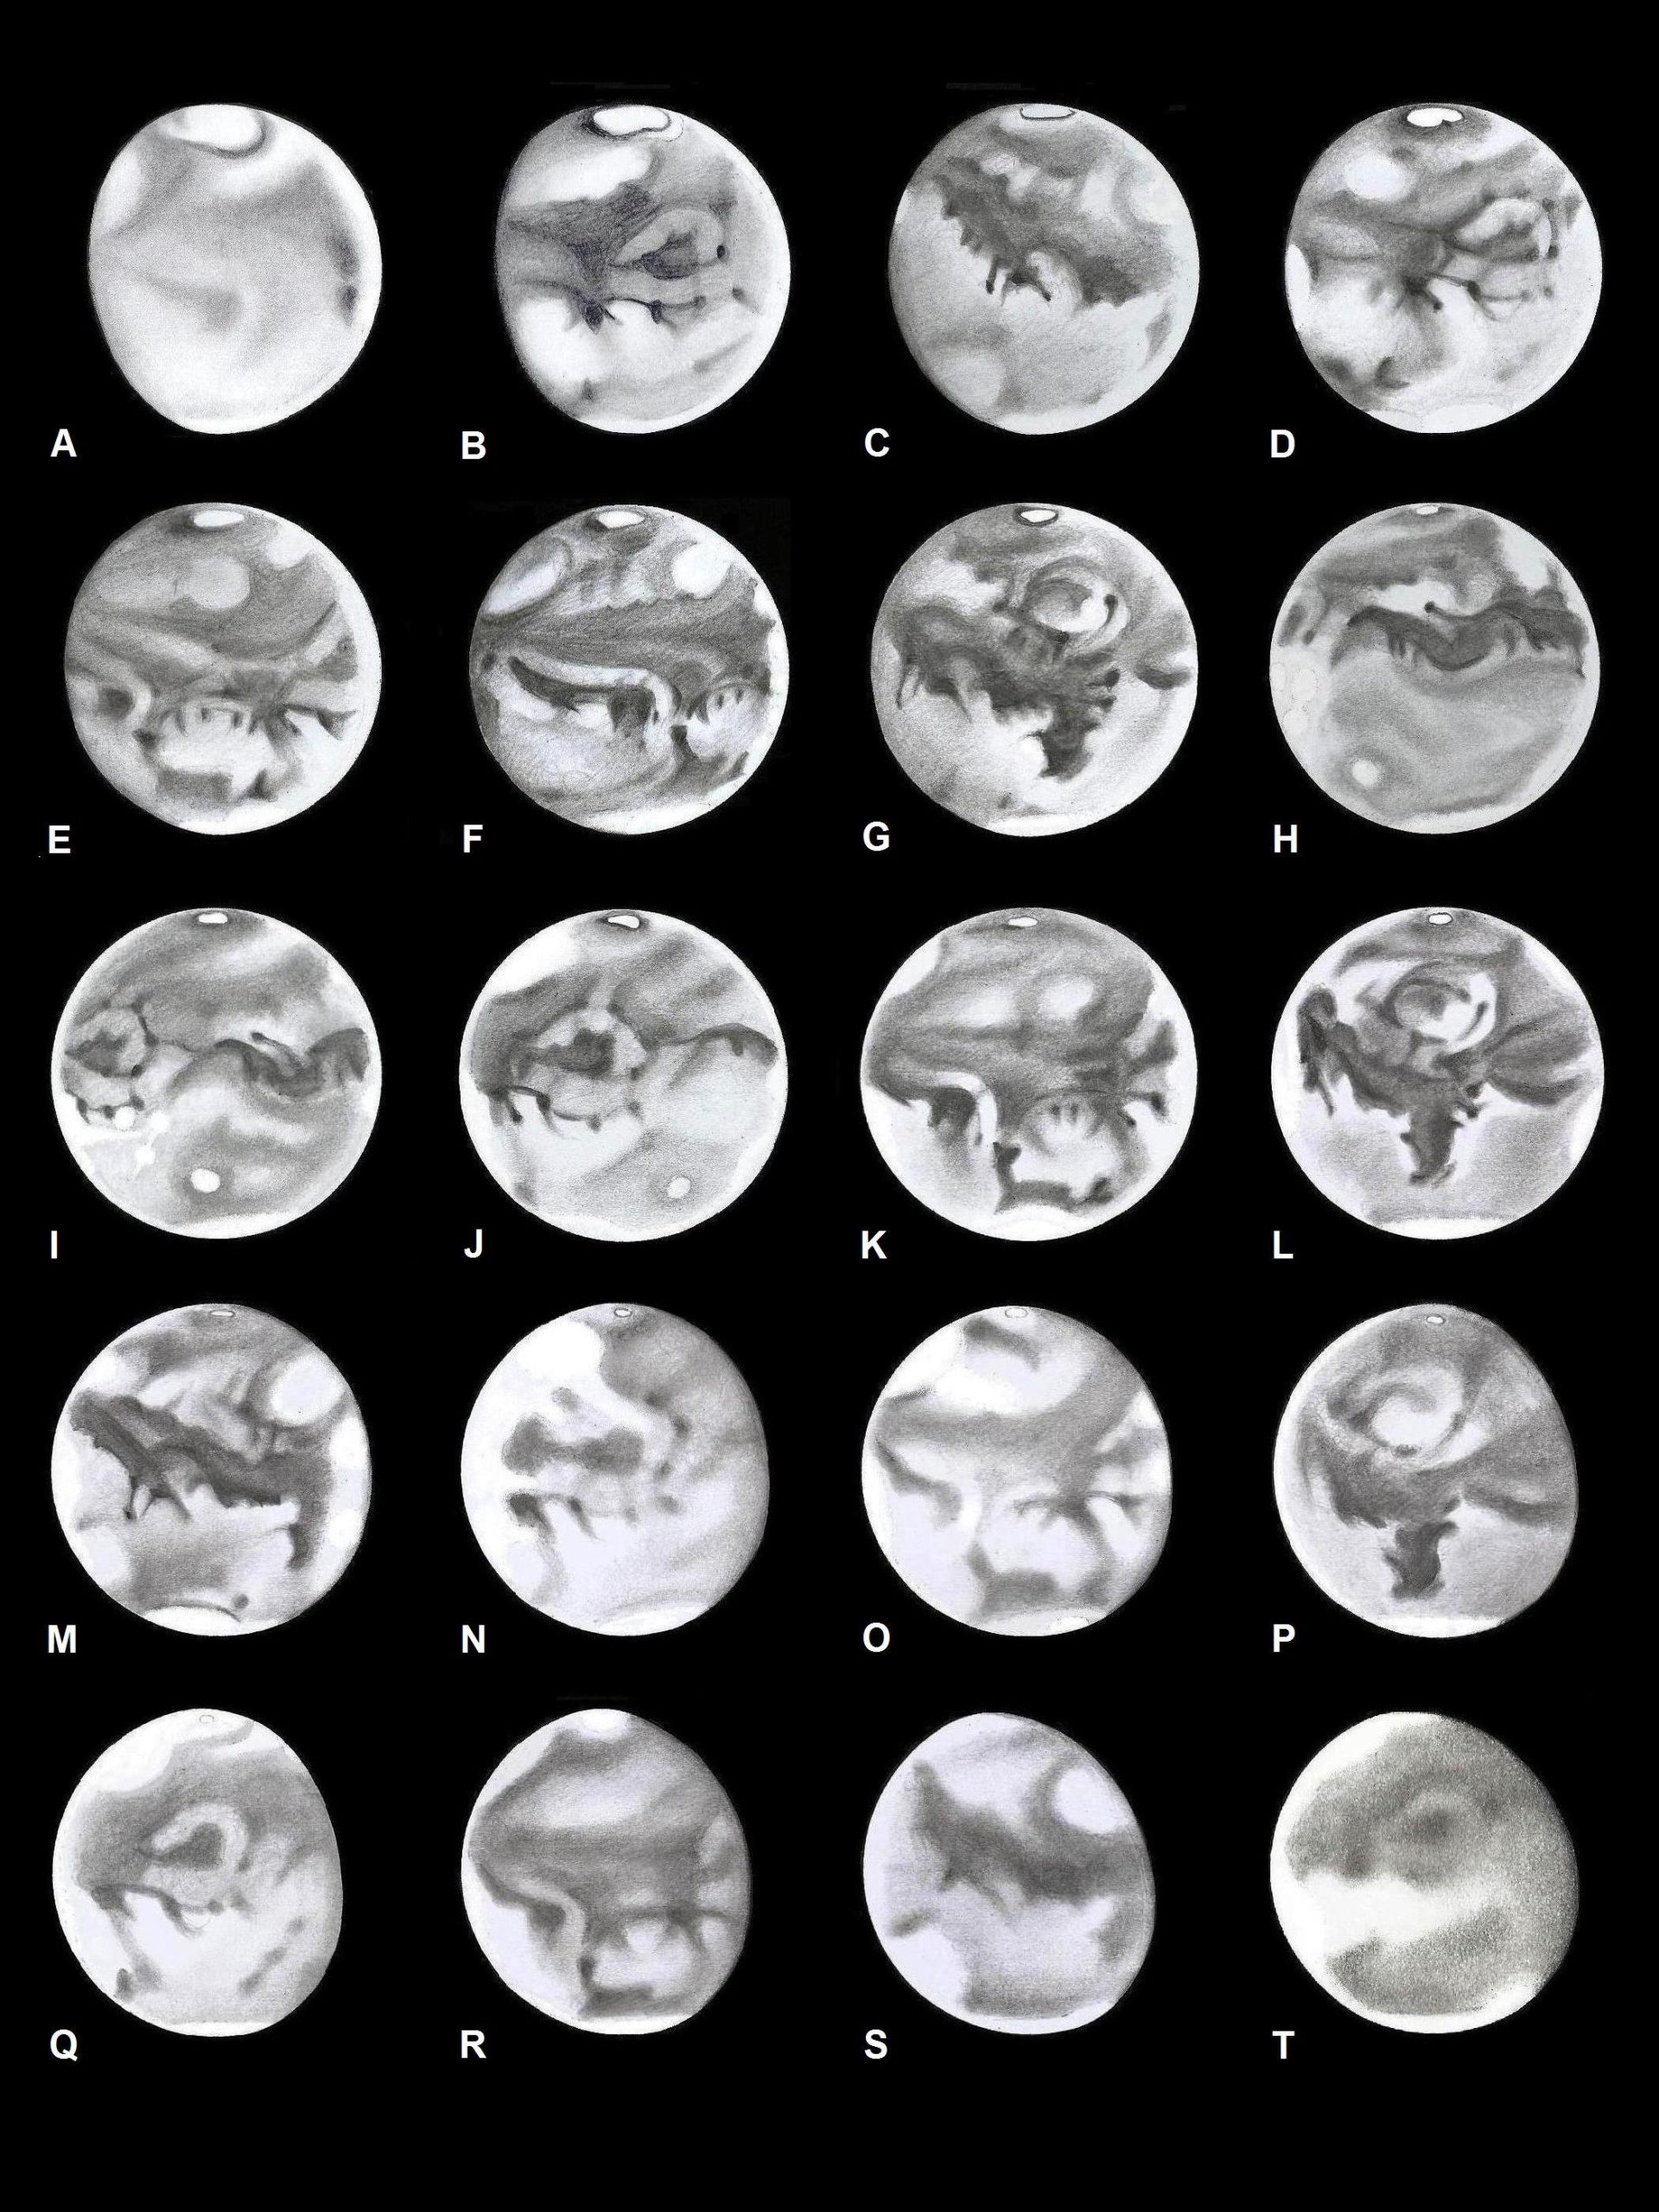 Black and white pencil drawings of Mars arranged in five rows and labelled A to T, with key features appearing as described in the caption